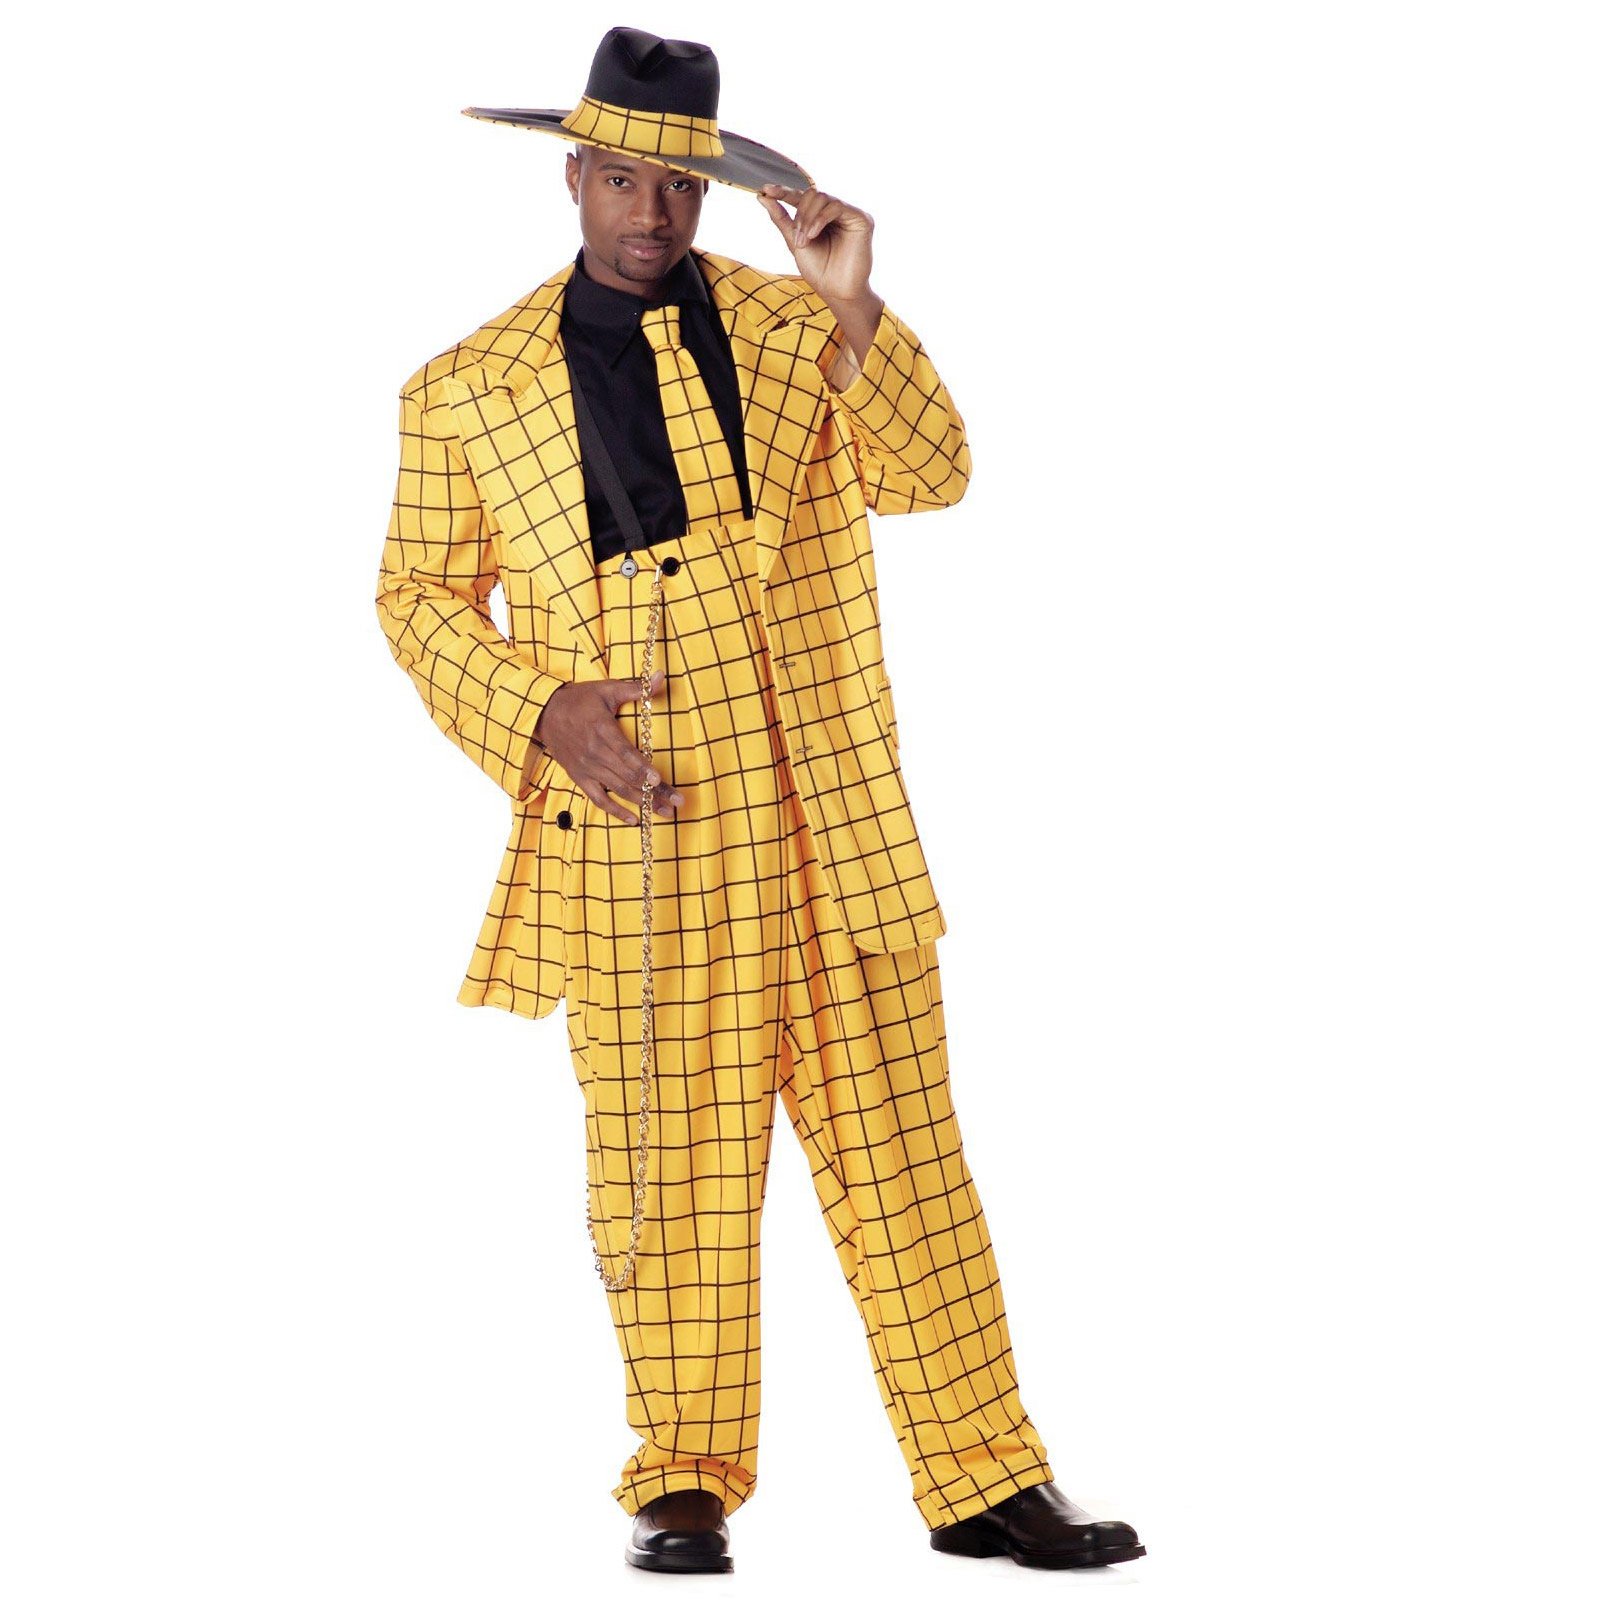 Click here for the zoot suit story